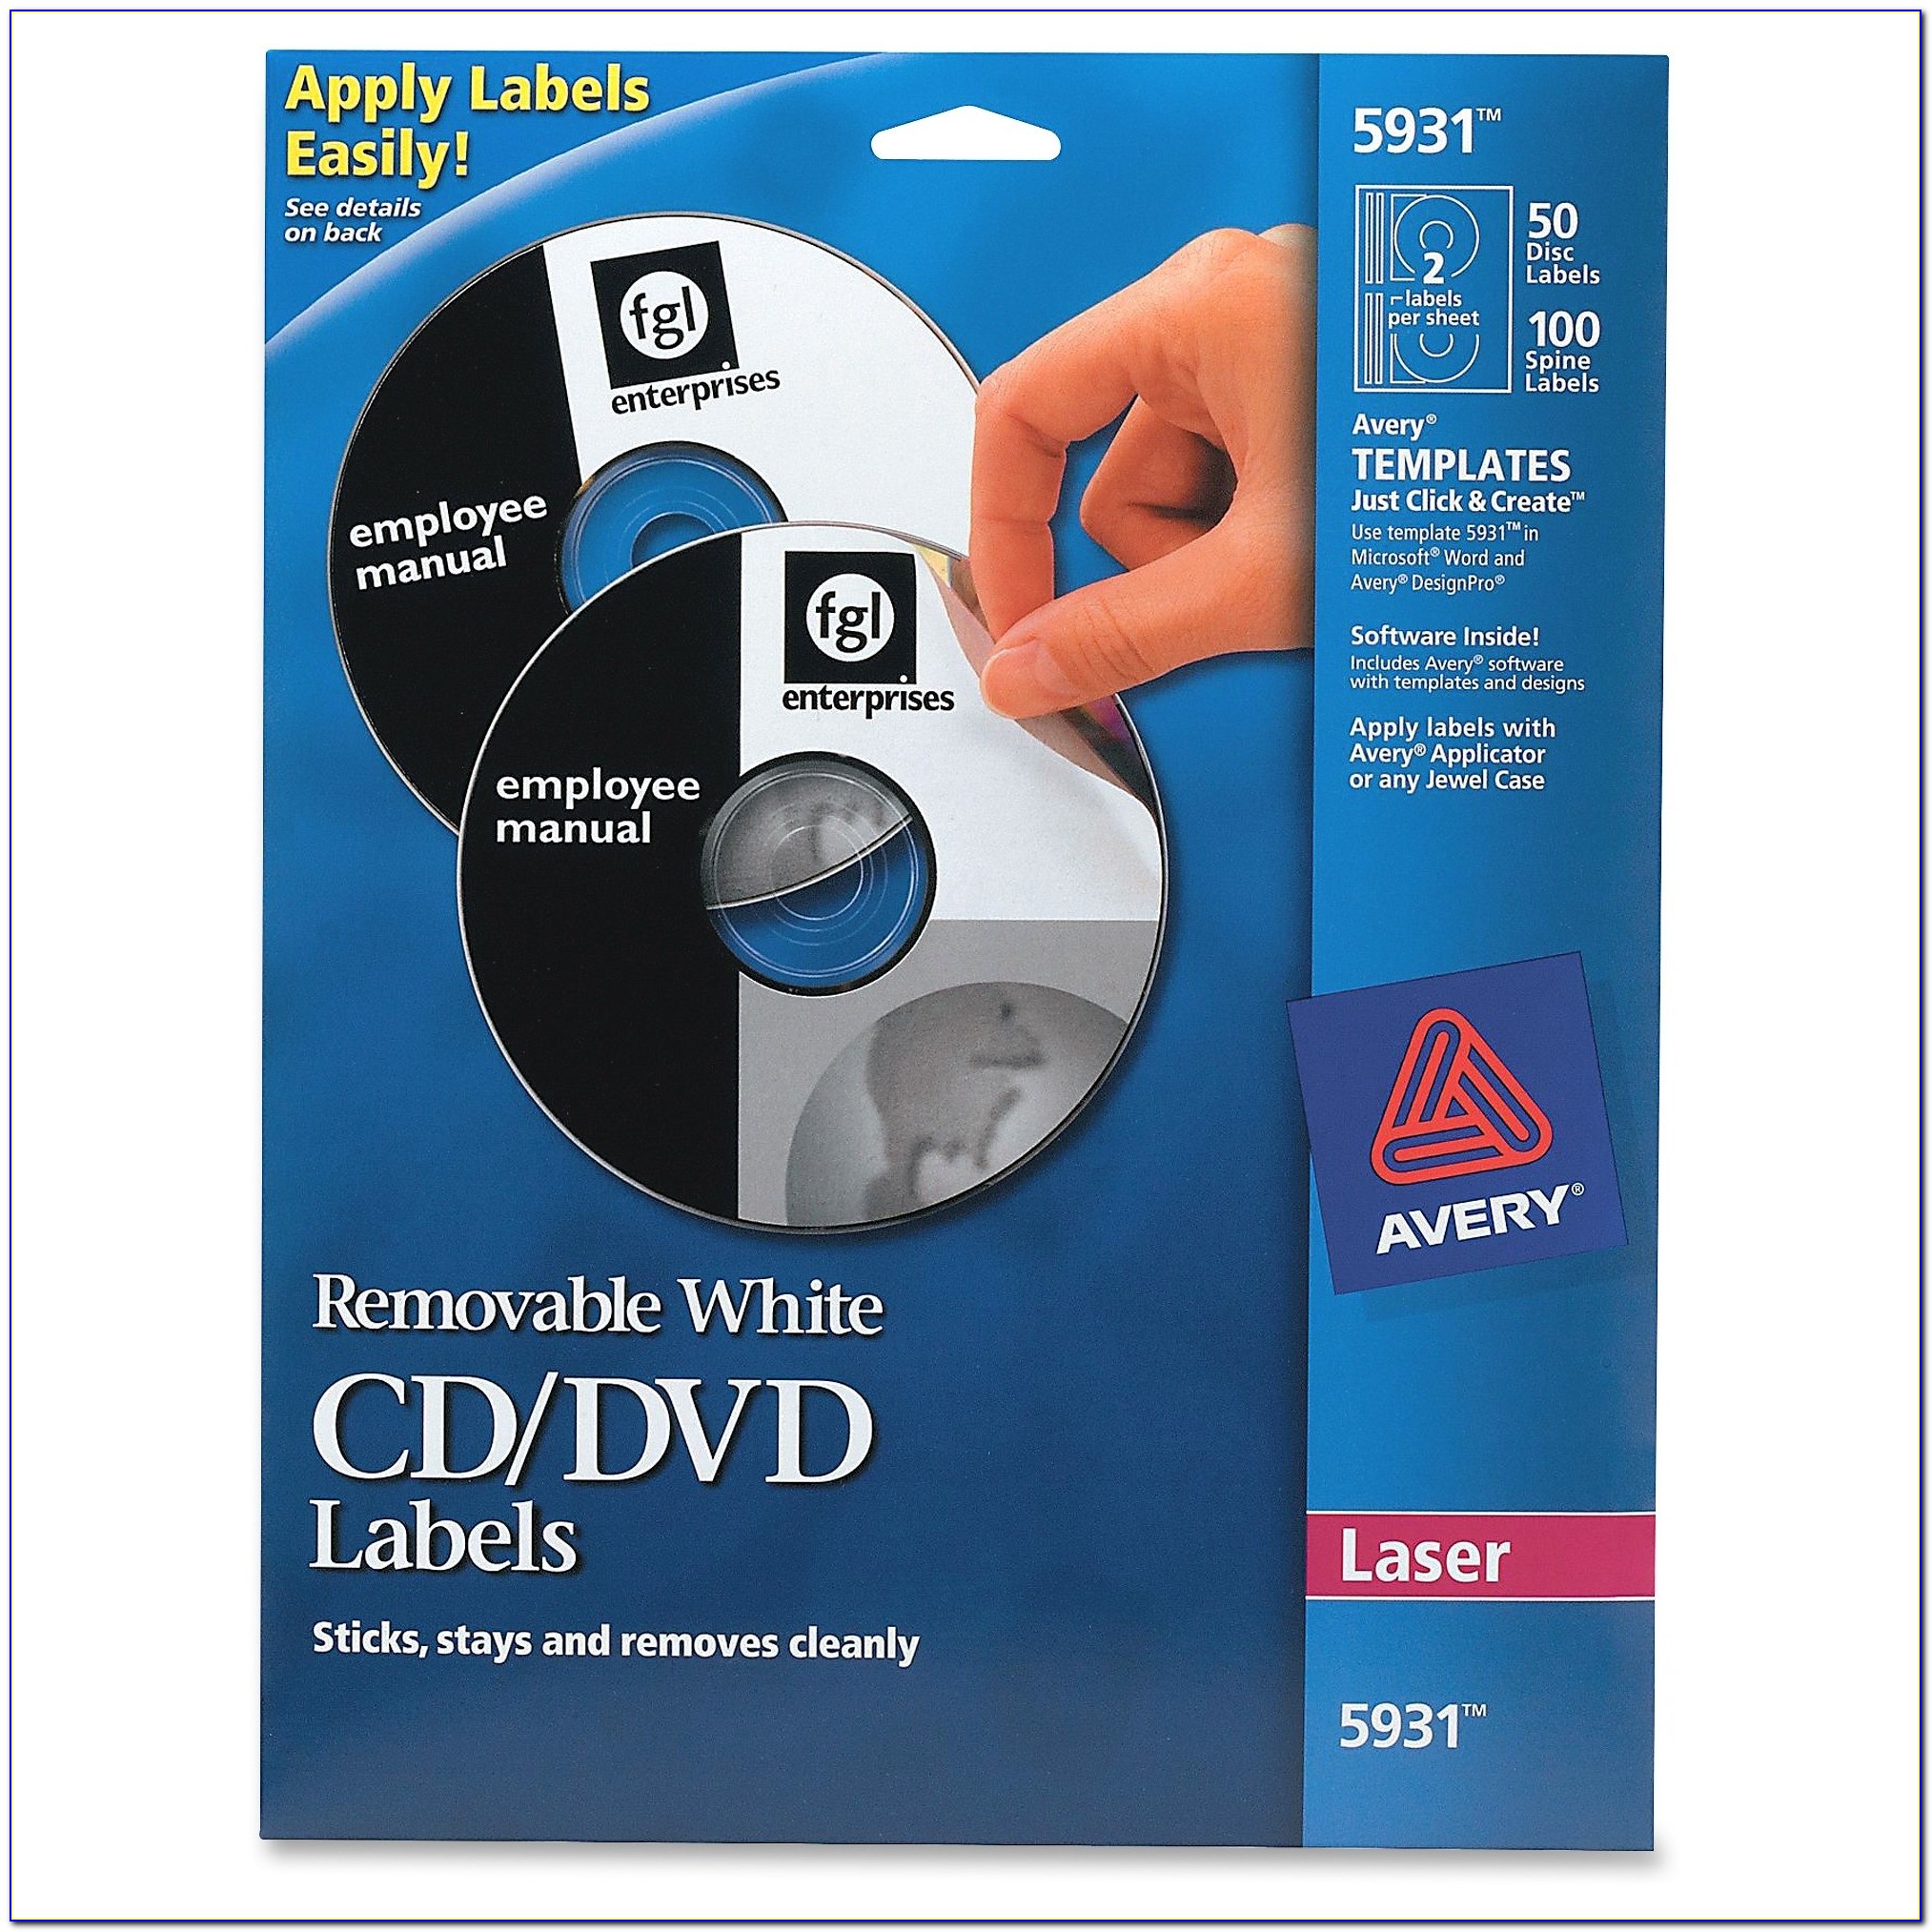 Avery Laser Labels 5162 Template